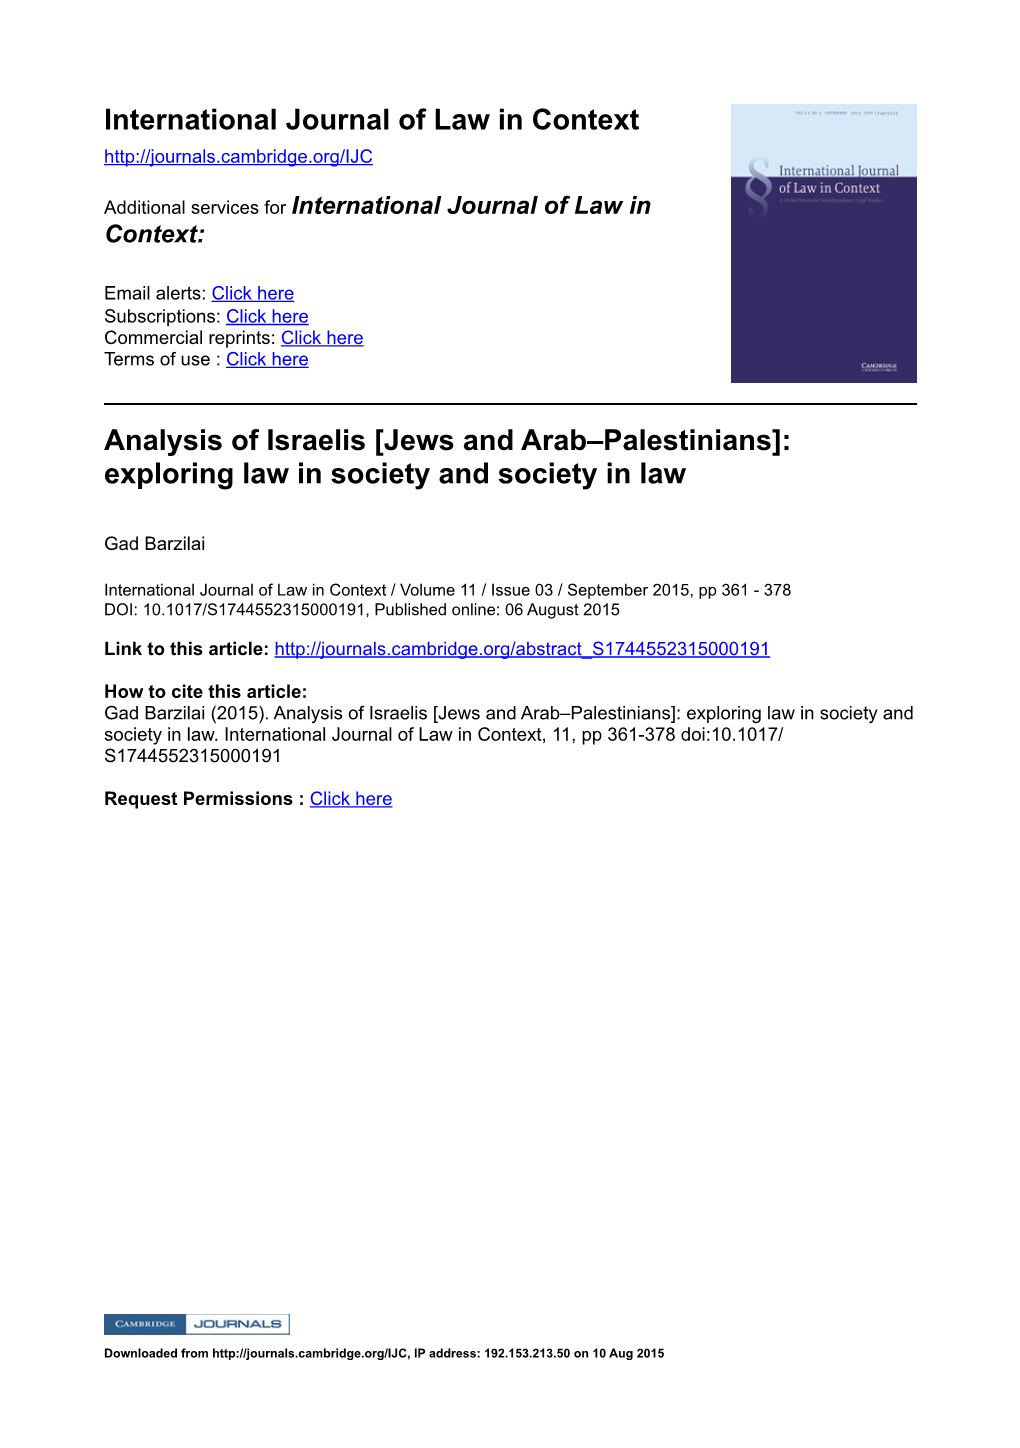 International Journal of Law in Context Analysis of Israelis [Jews and Arab